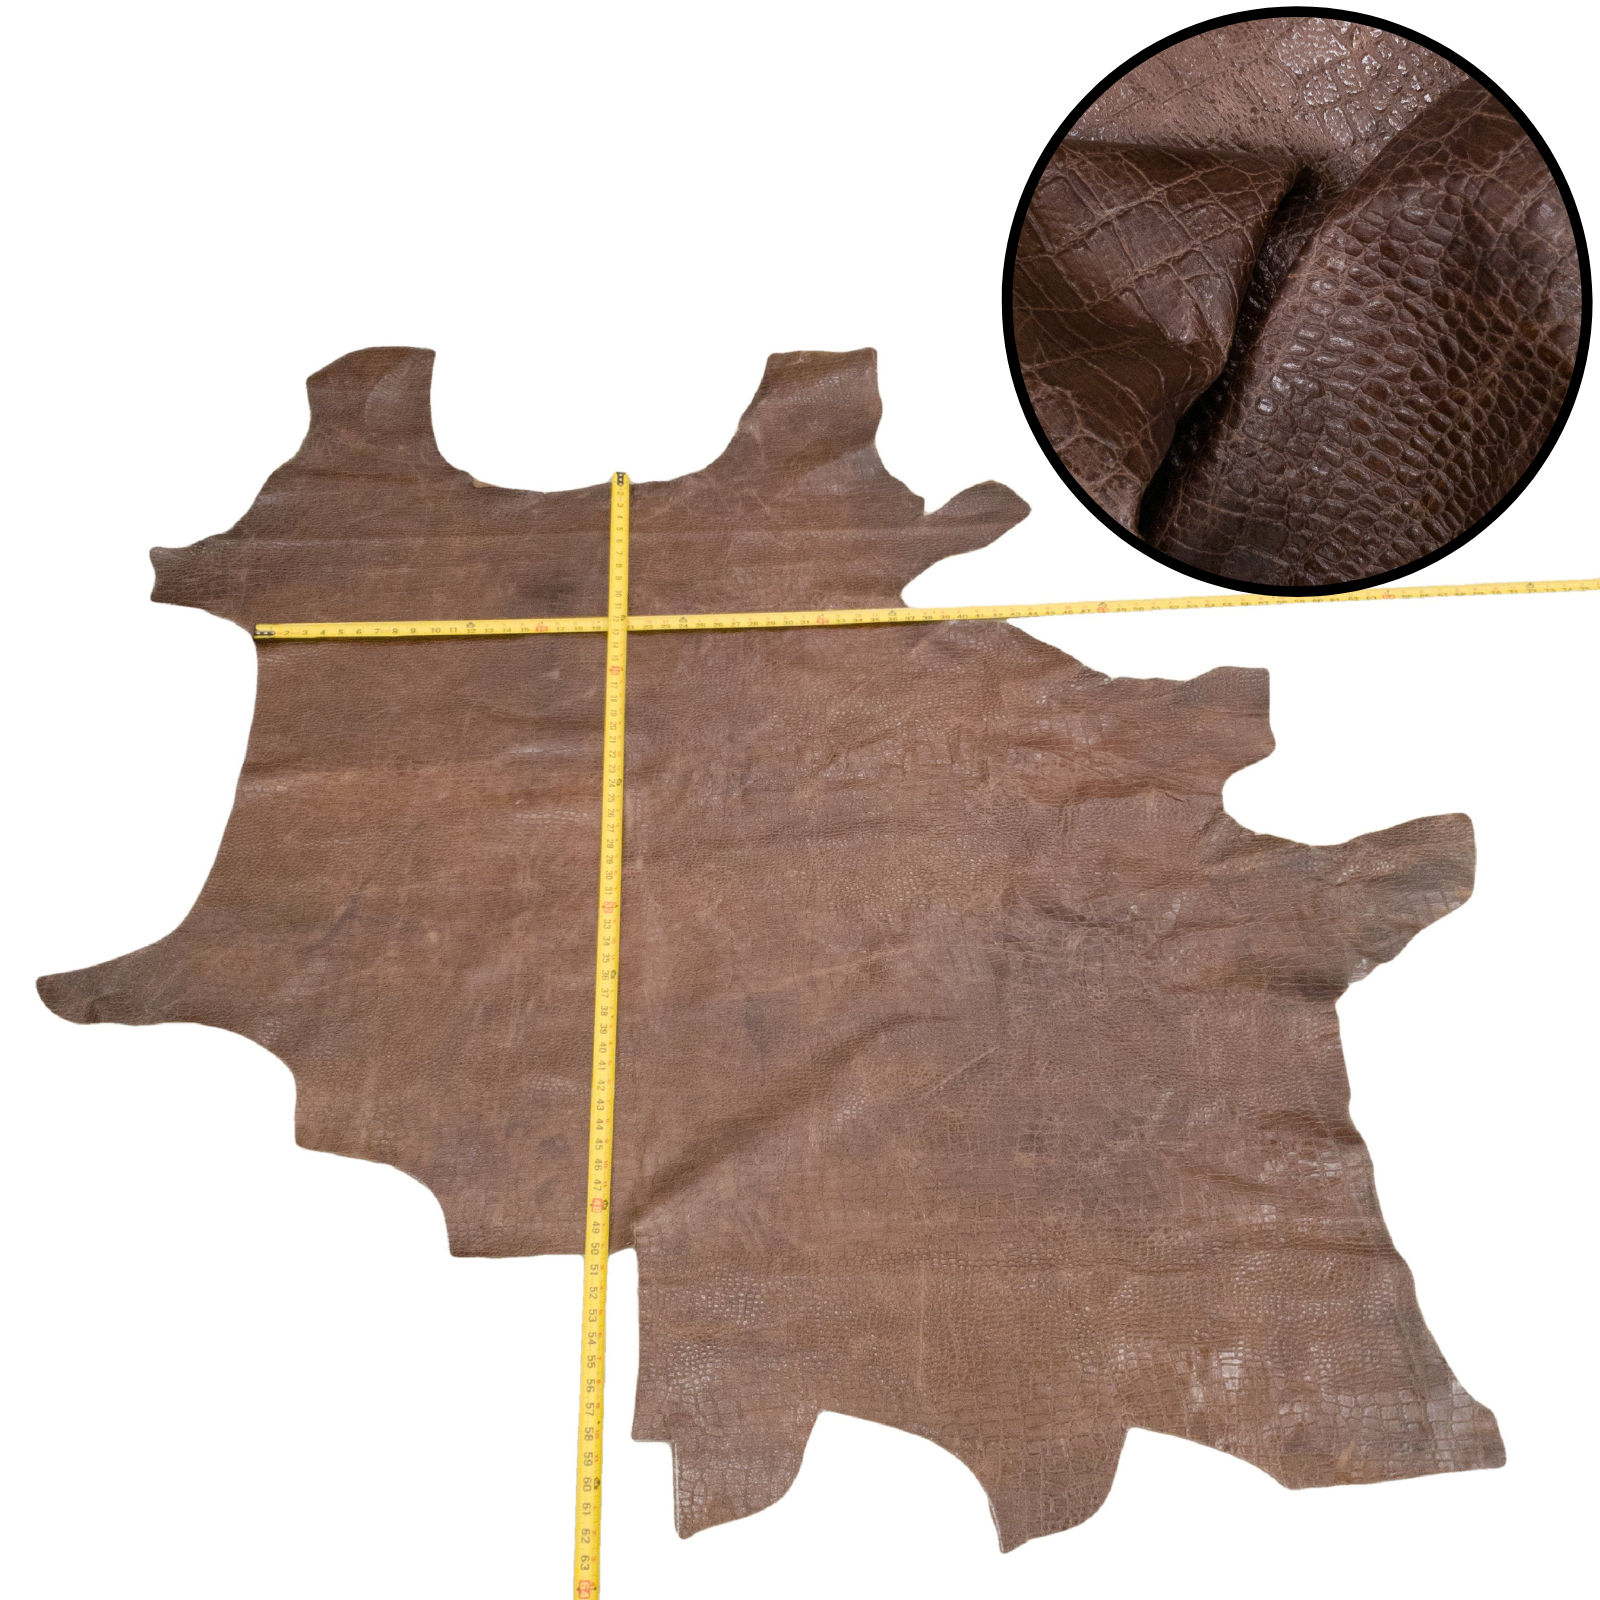 Embossed, 4-21 Sq Ft Upholstery Cowhide Project Pieces, Rustic Mahogany (3-4 oz) / 14 / 1 | The Leather Guy